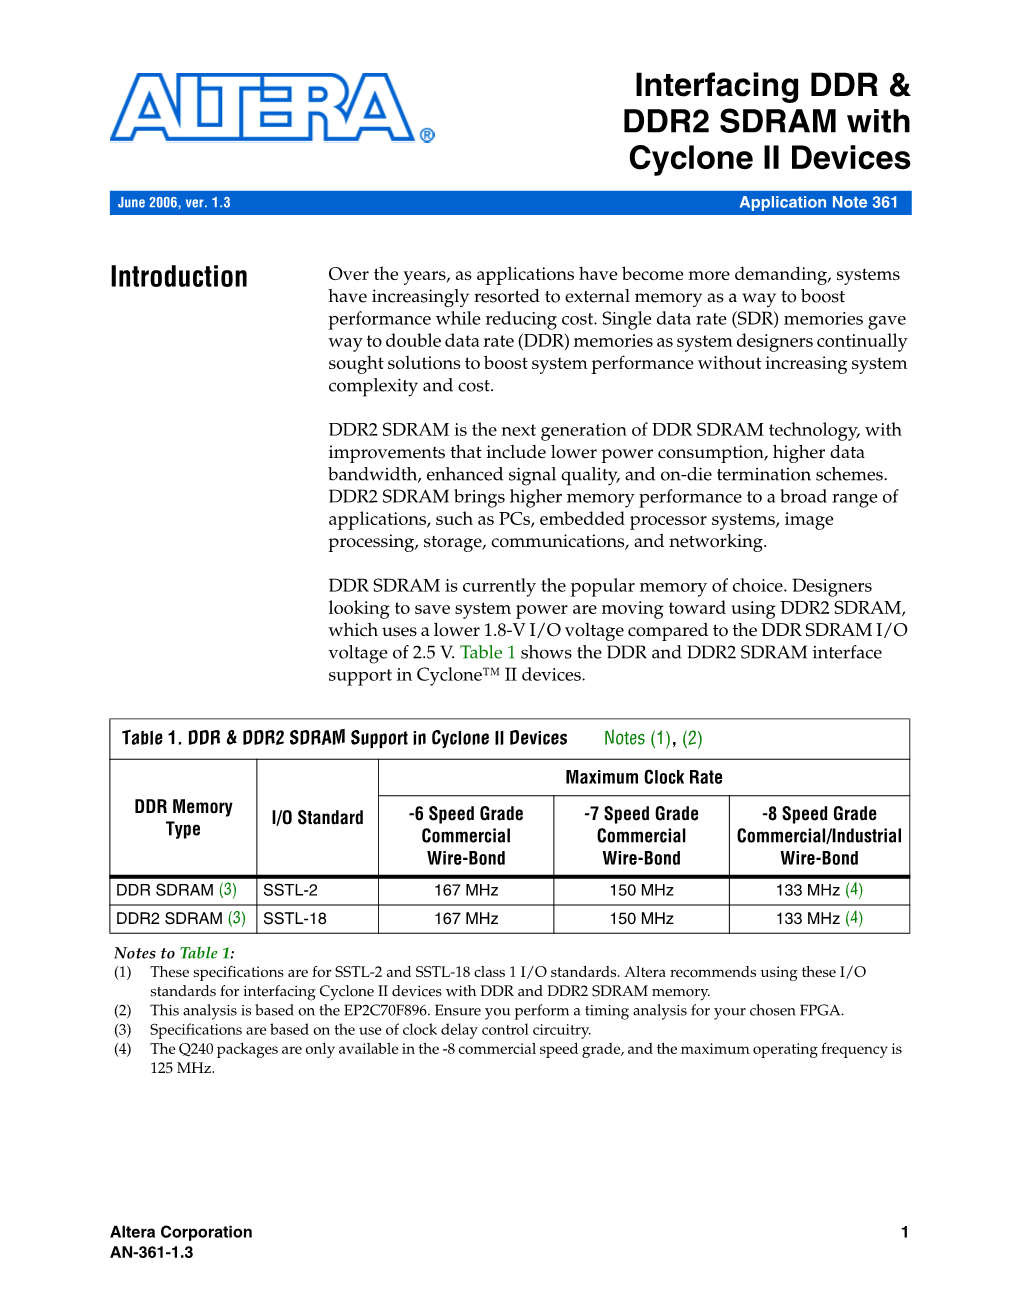 AN 361: Interfacing DDR & DDR2 SDRAM with Cyclone II Devices